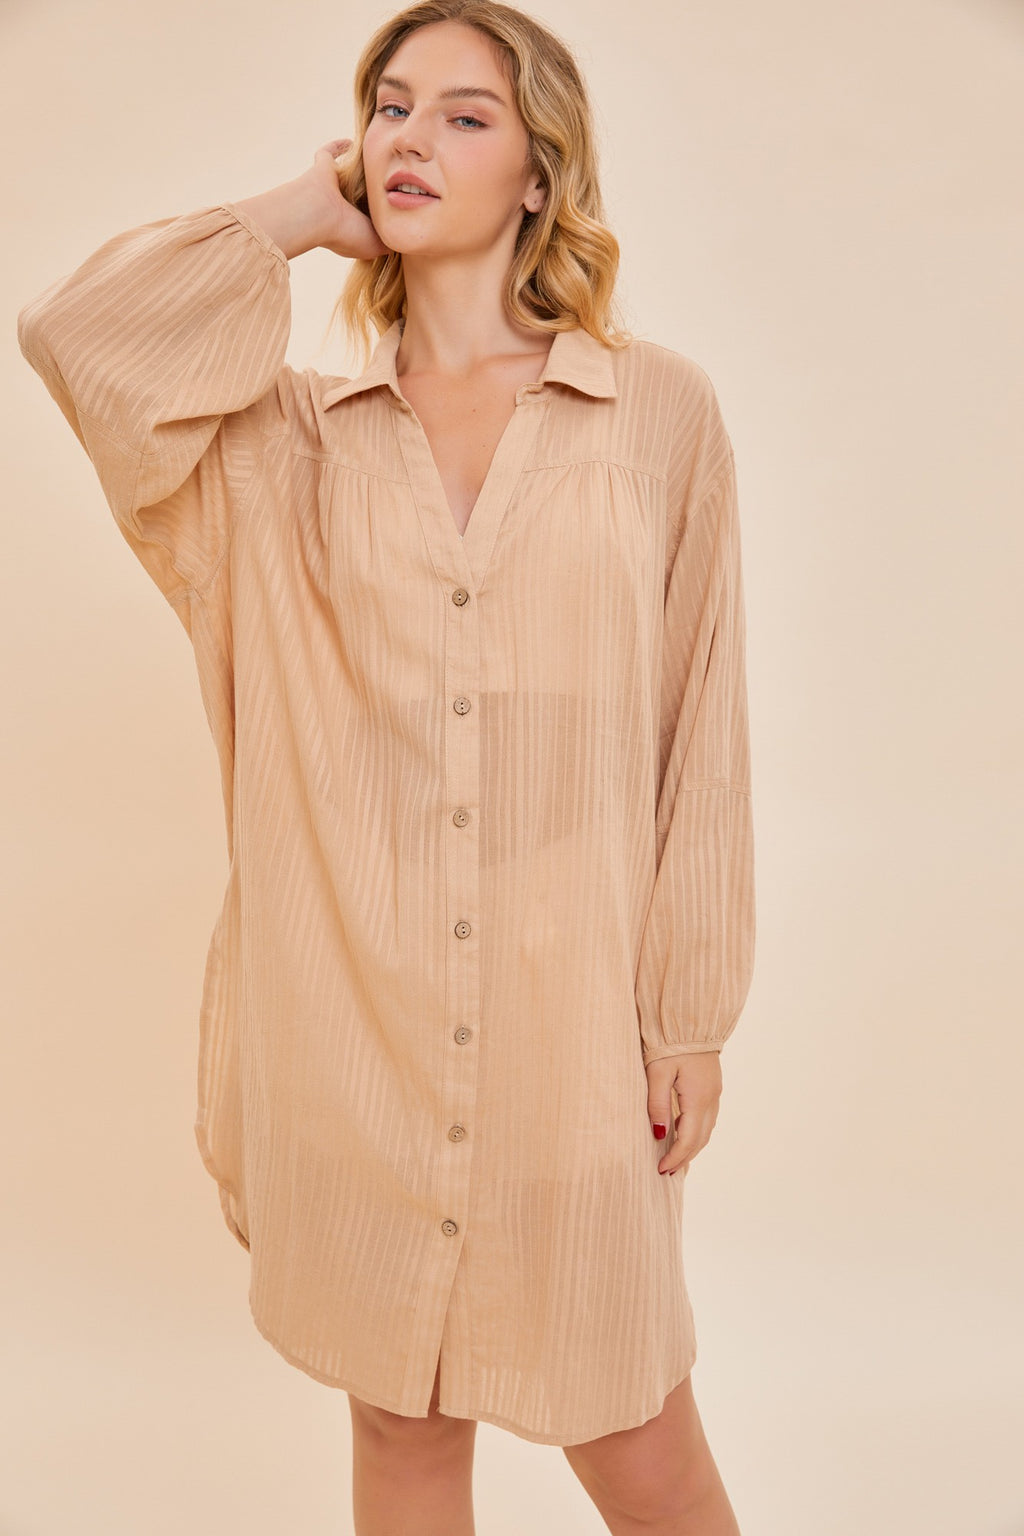 Just As You Are Button Up Tunic